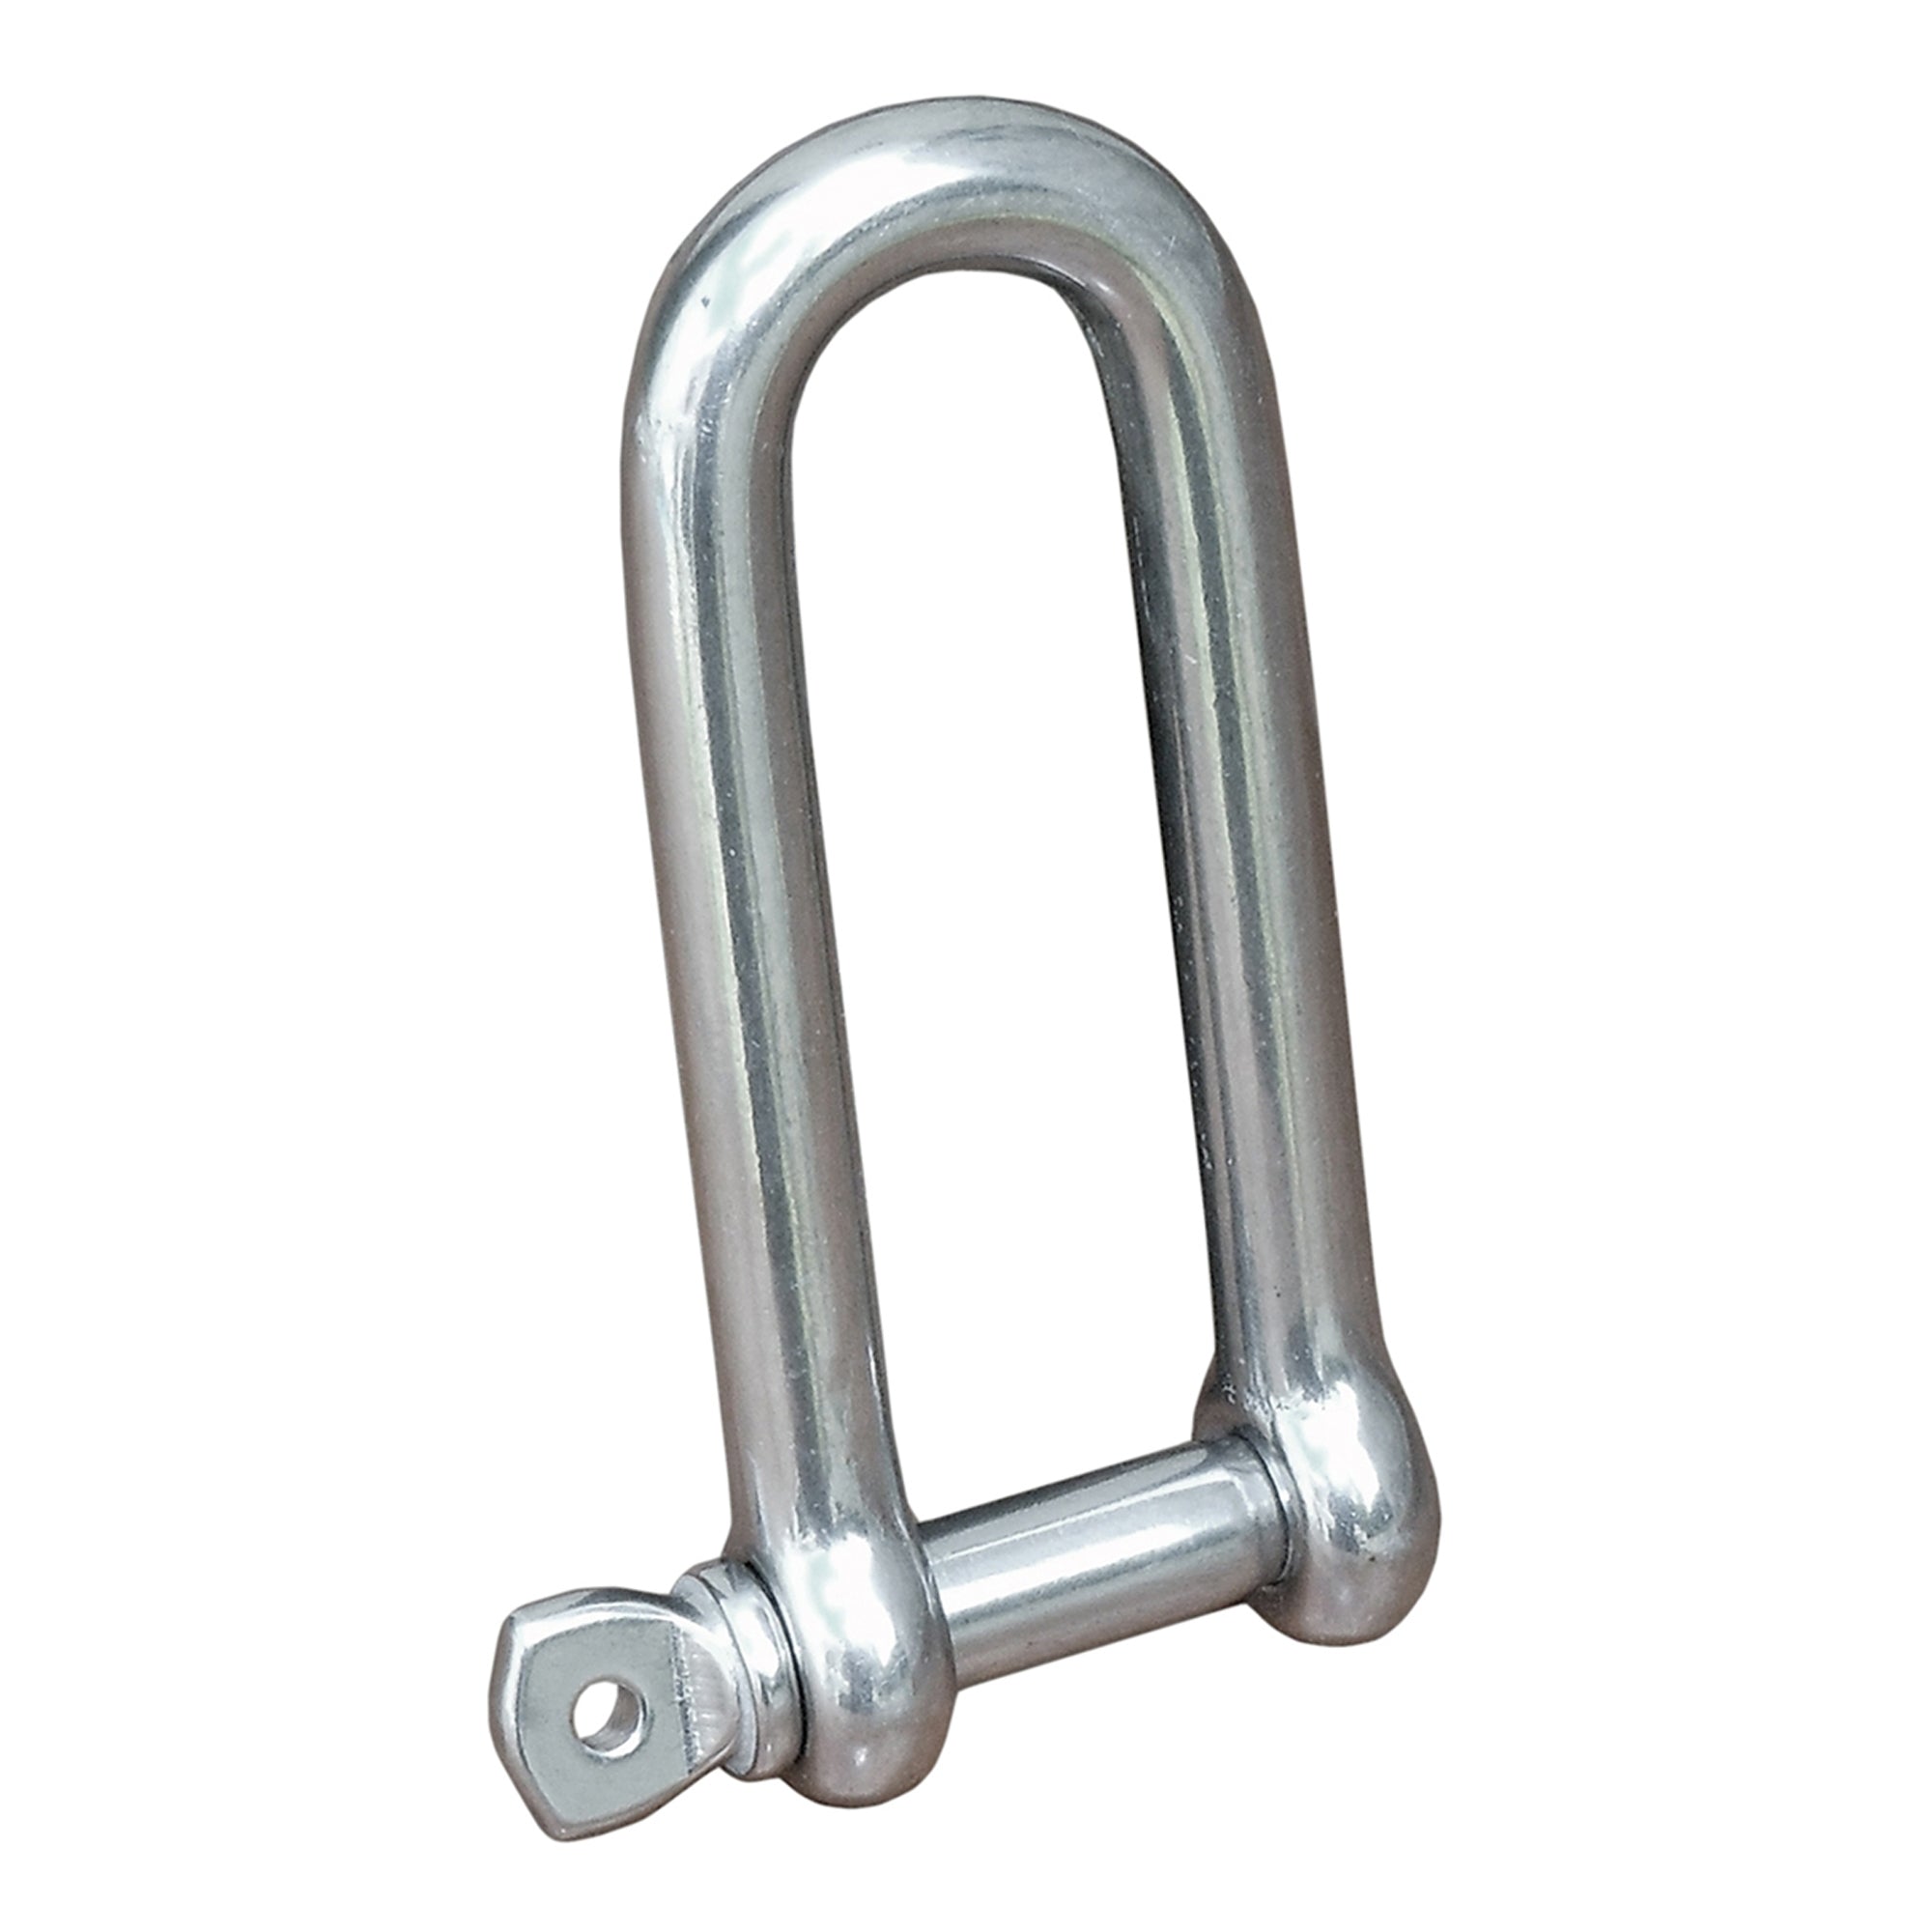 Screw Pin Long "D" Rigging Shackle 3/16", Stainless Steel - FO3679